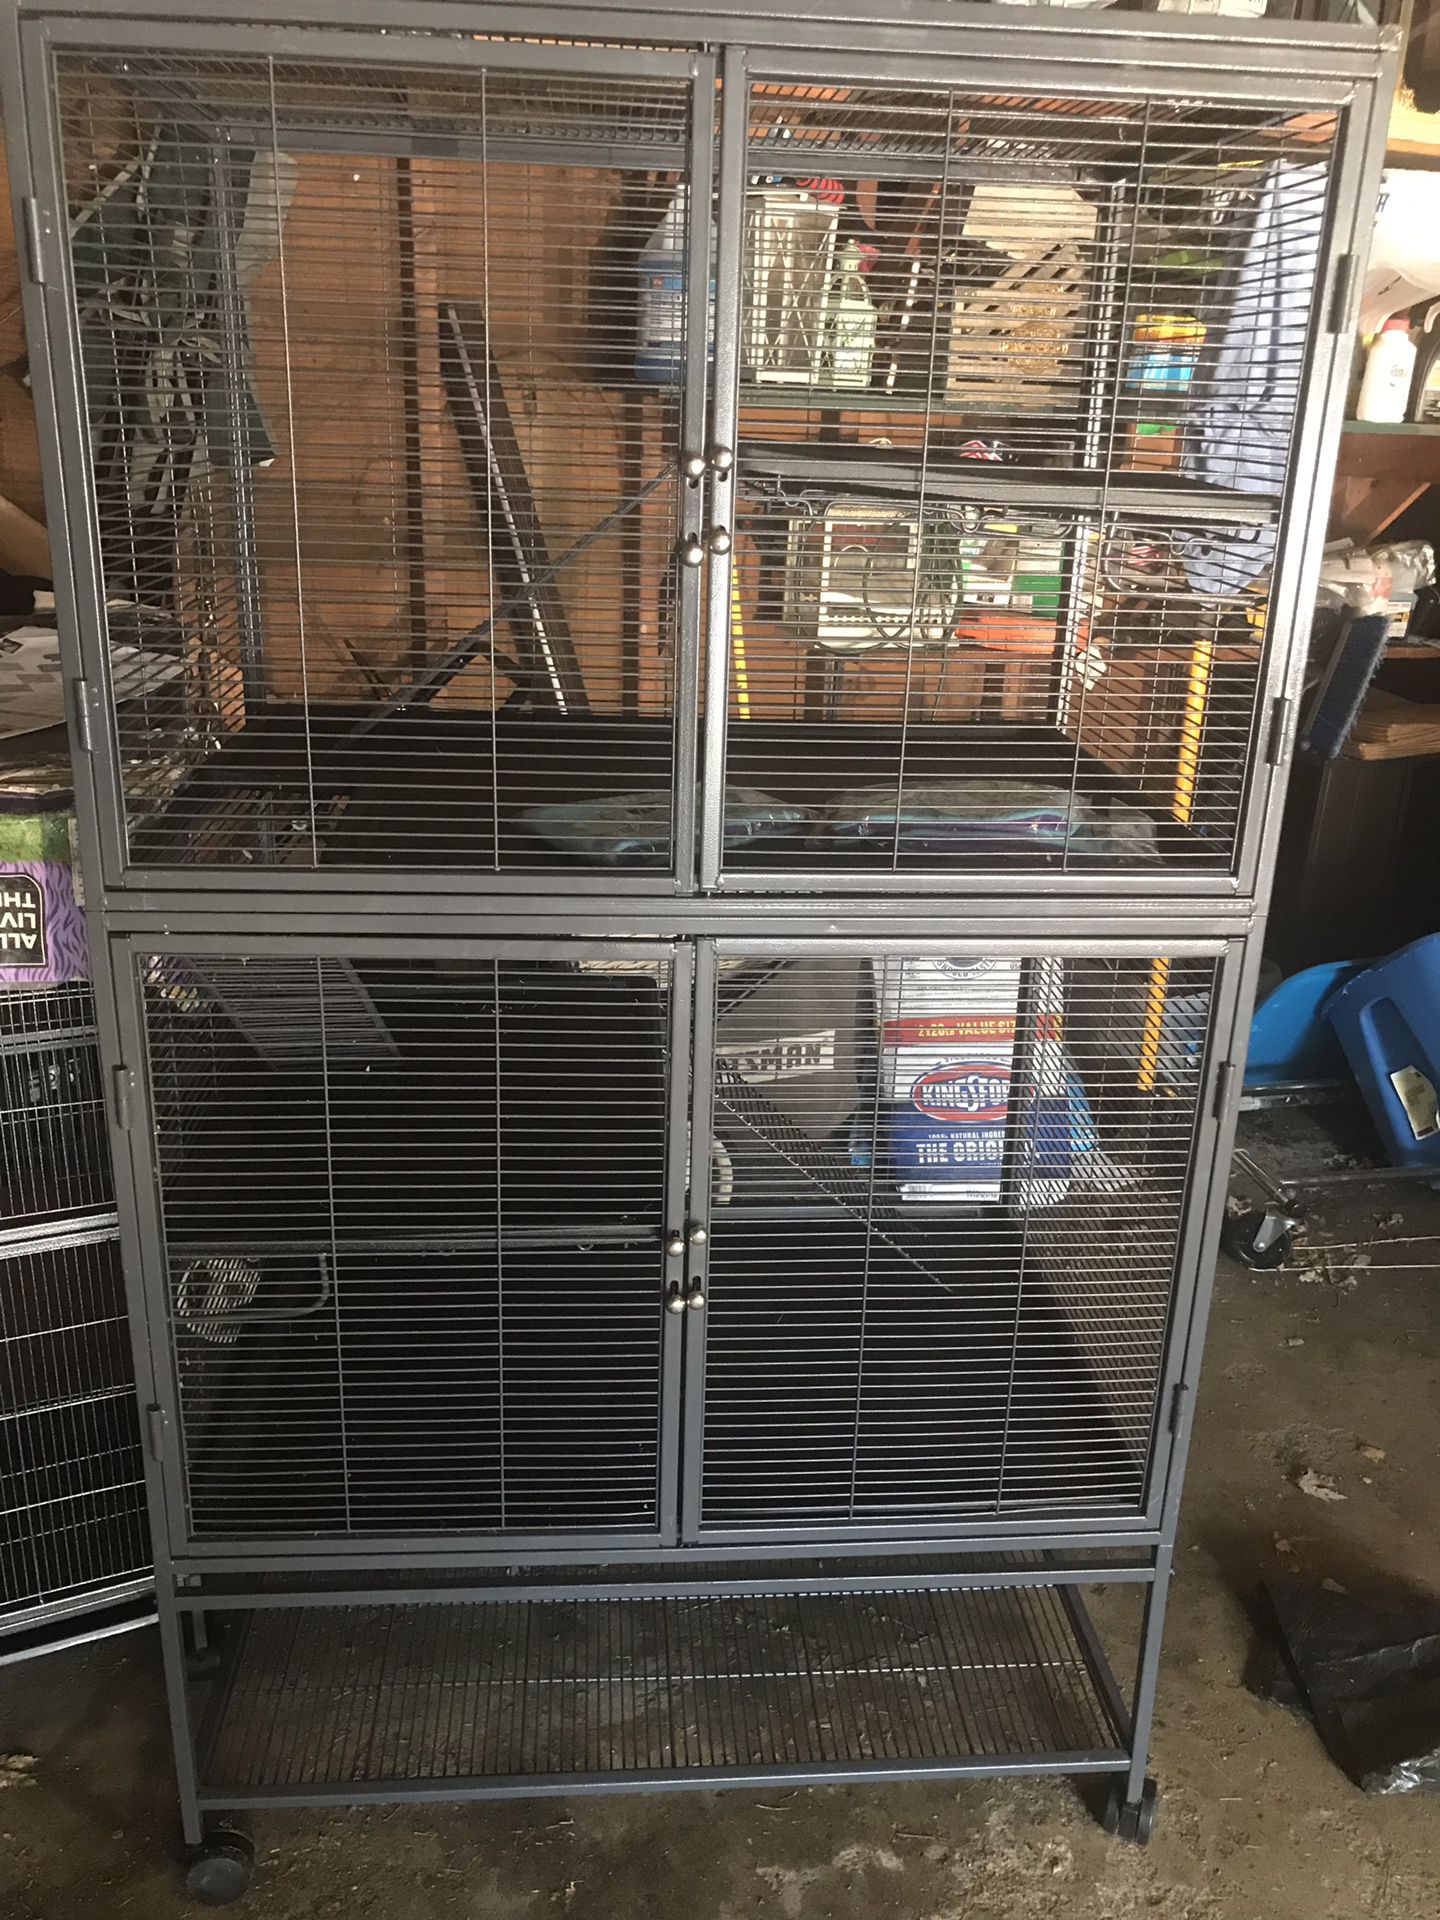 Huge cage for pets